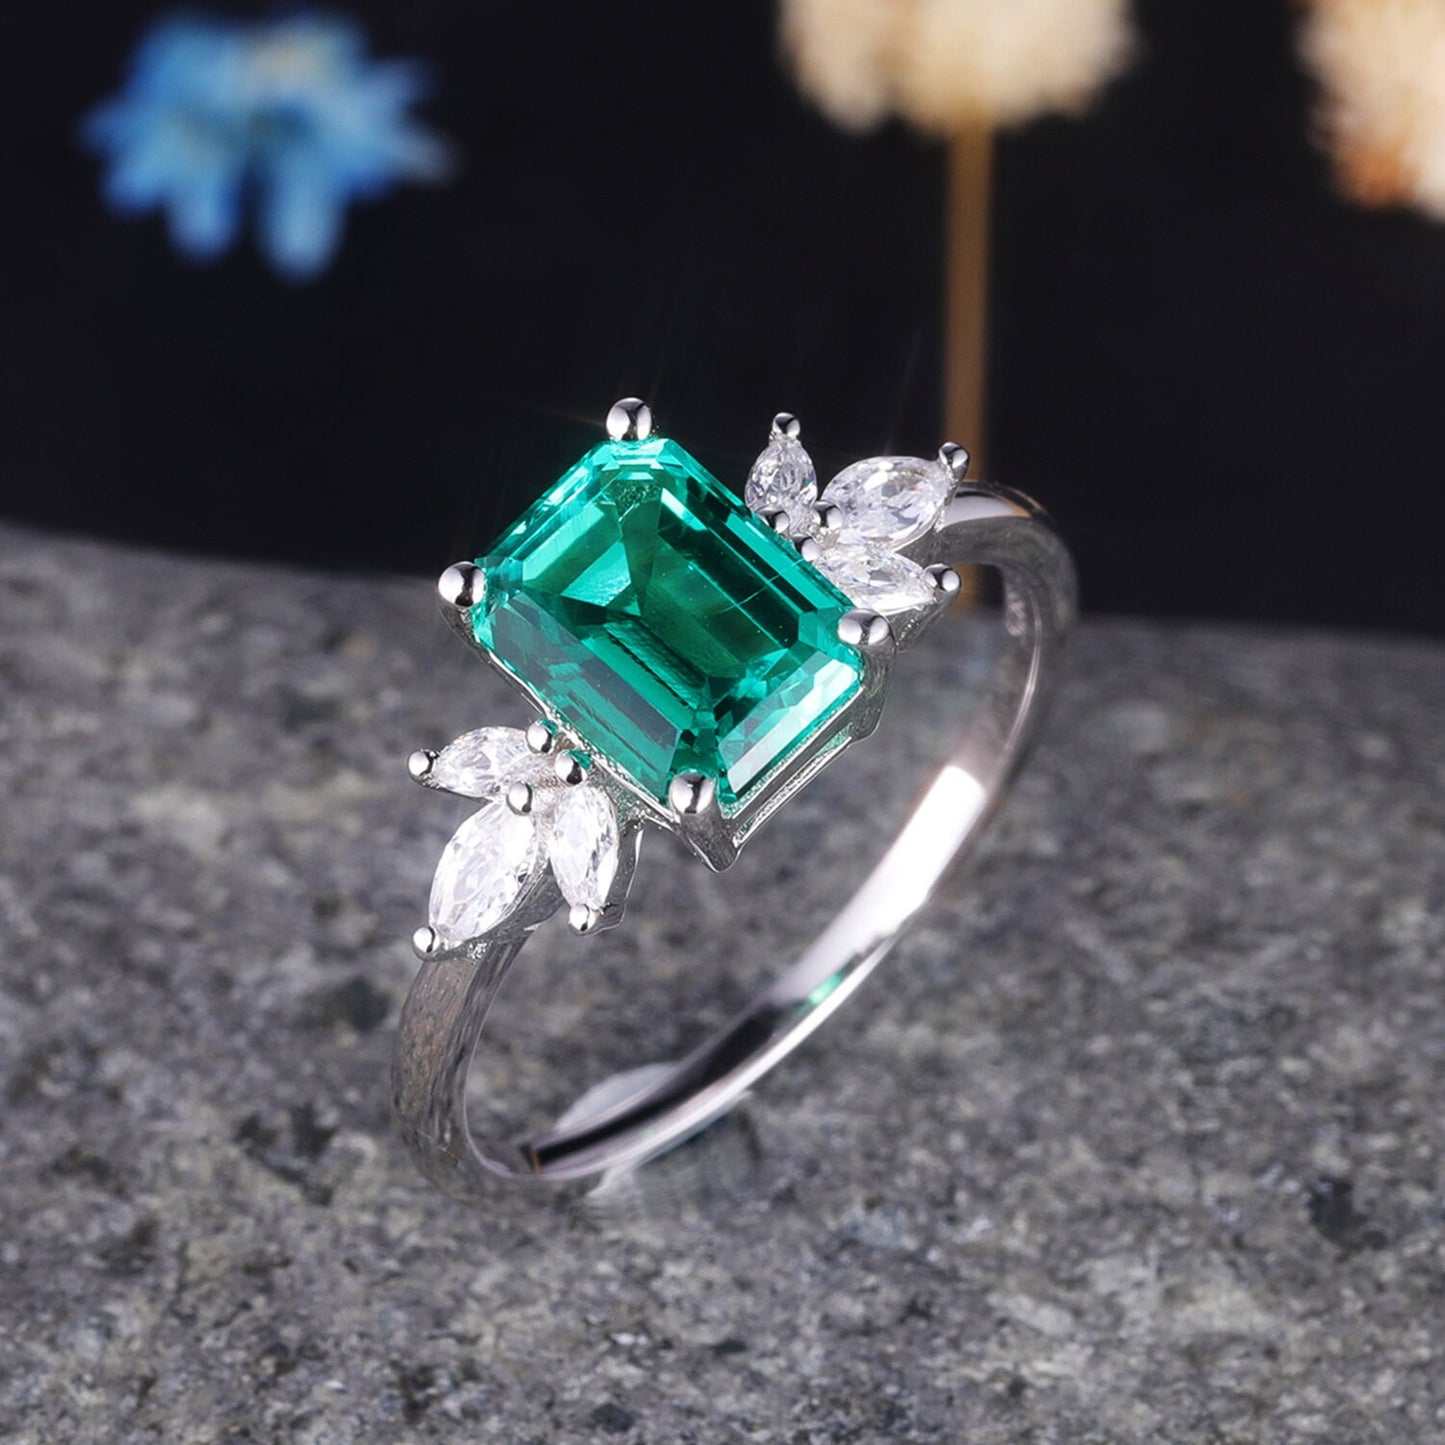 Emerald ring women moissanite engagement ring white gold art deco wedding band floral vintage bridal jewelry May birthstone anniversary gift